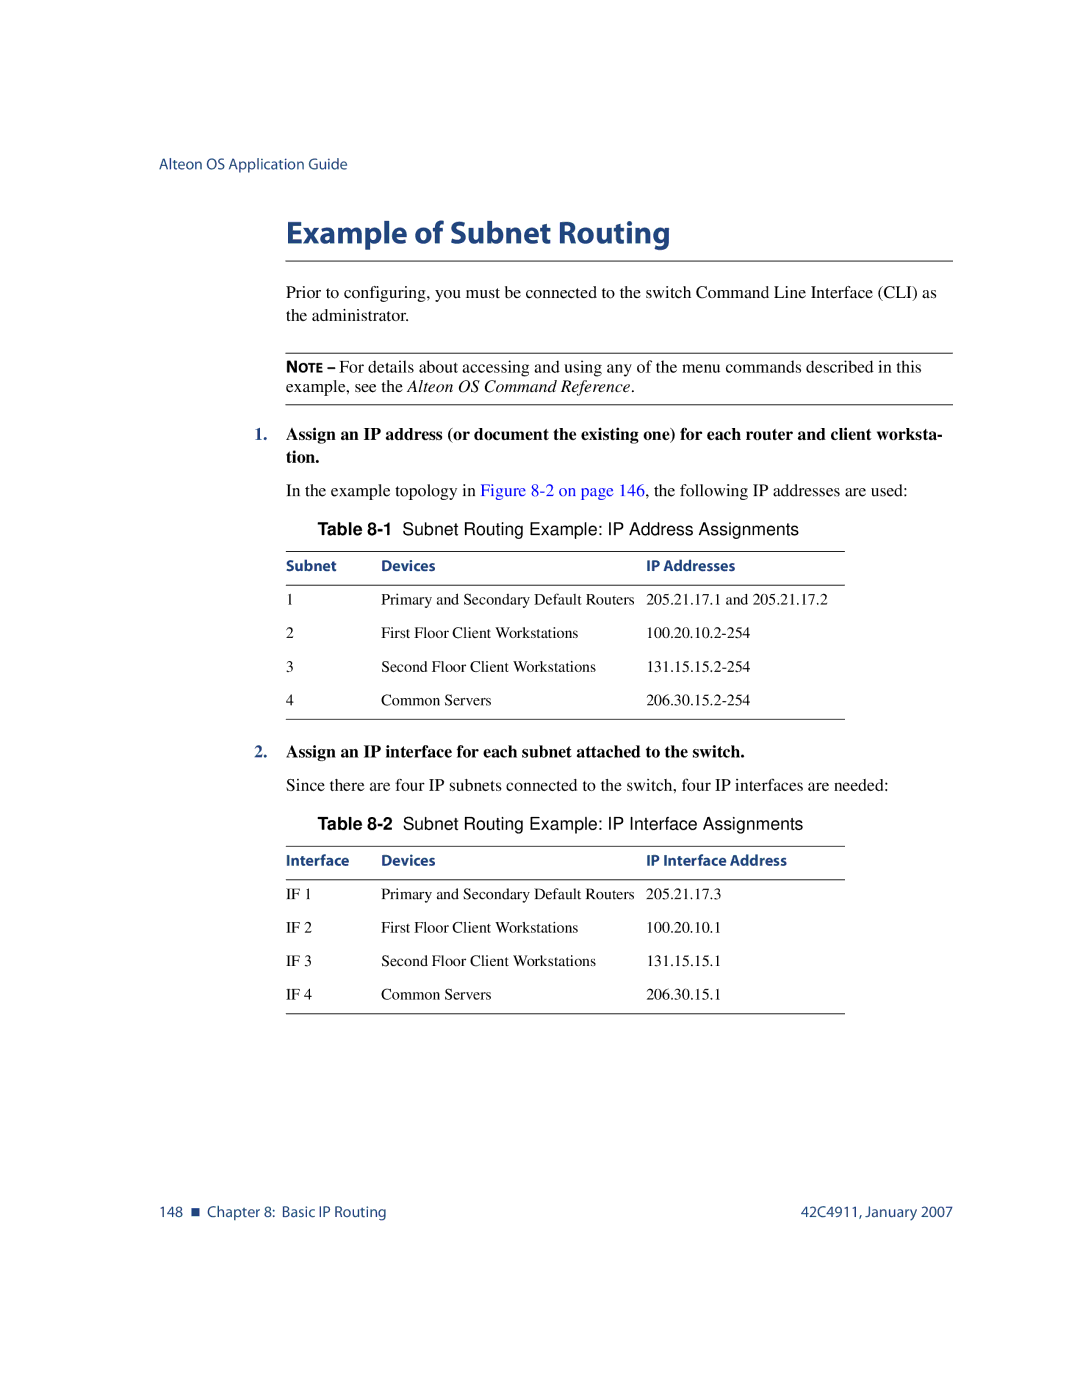 Nortel Networks 42C4911 manual Example of Subnet Routing, 1Subnet Routing Example IP Address Assignments 